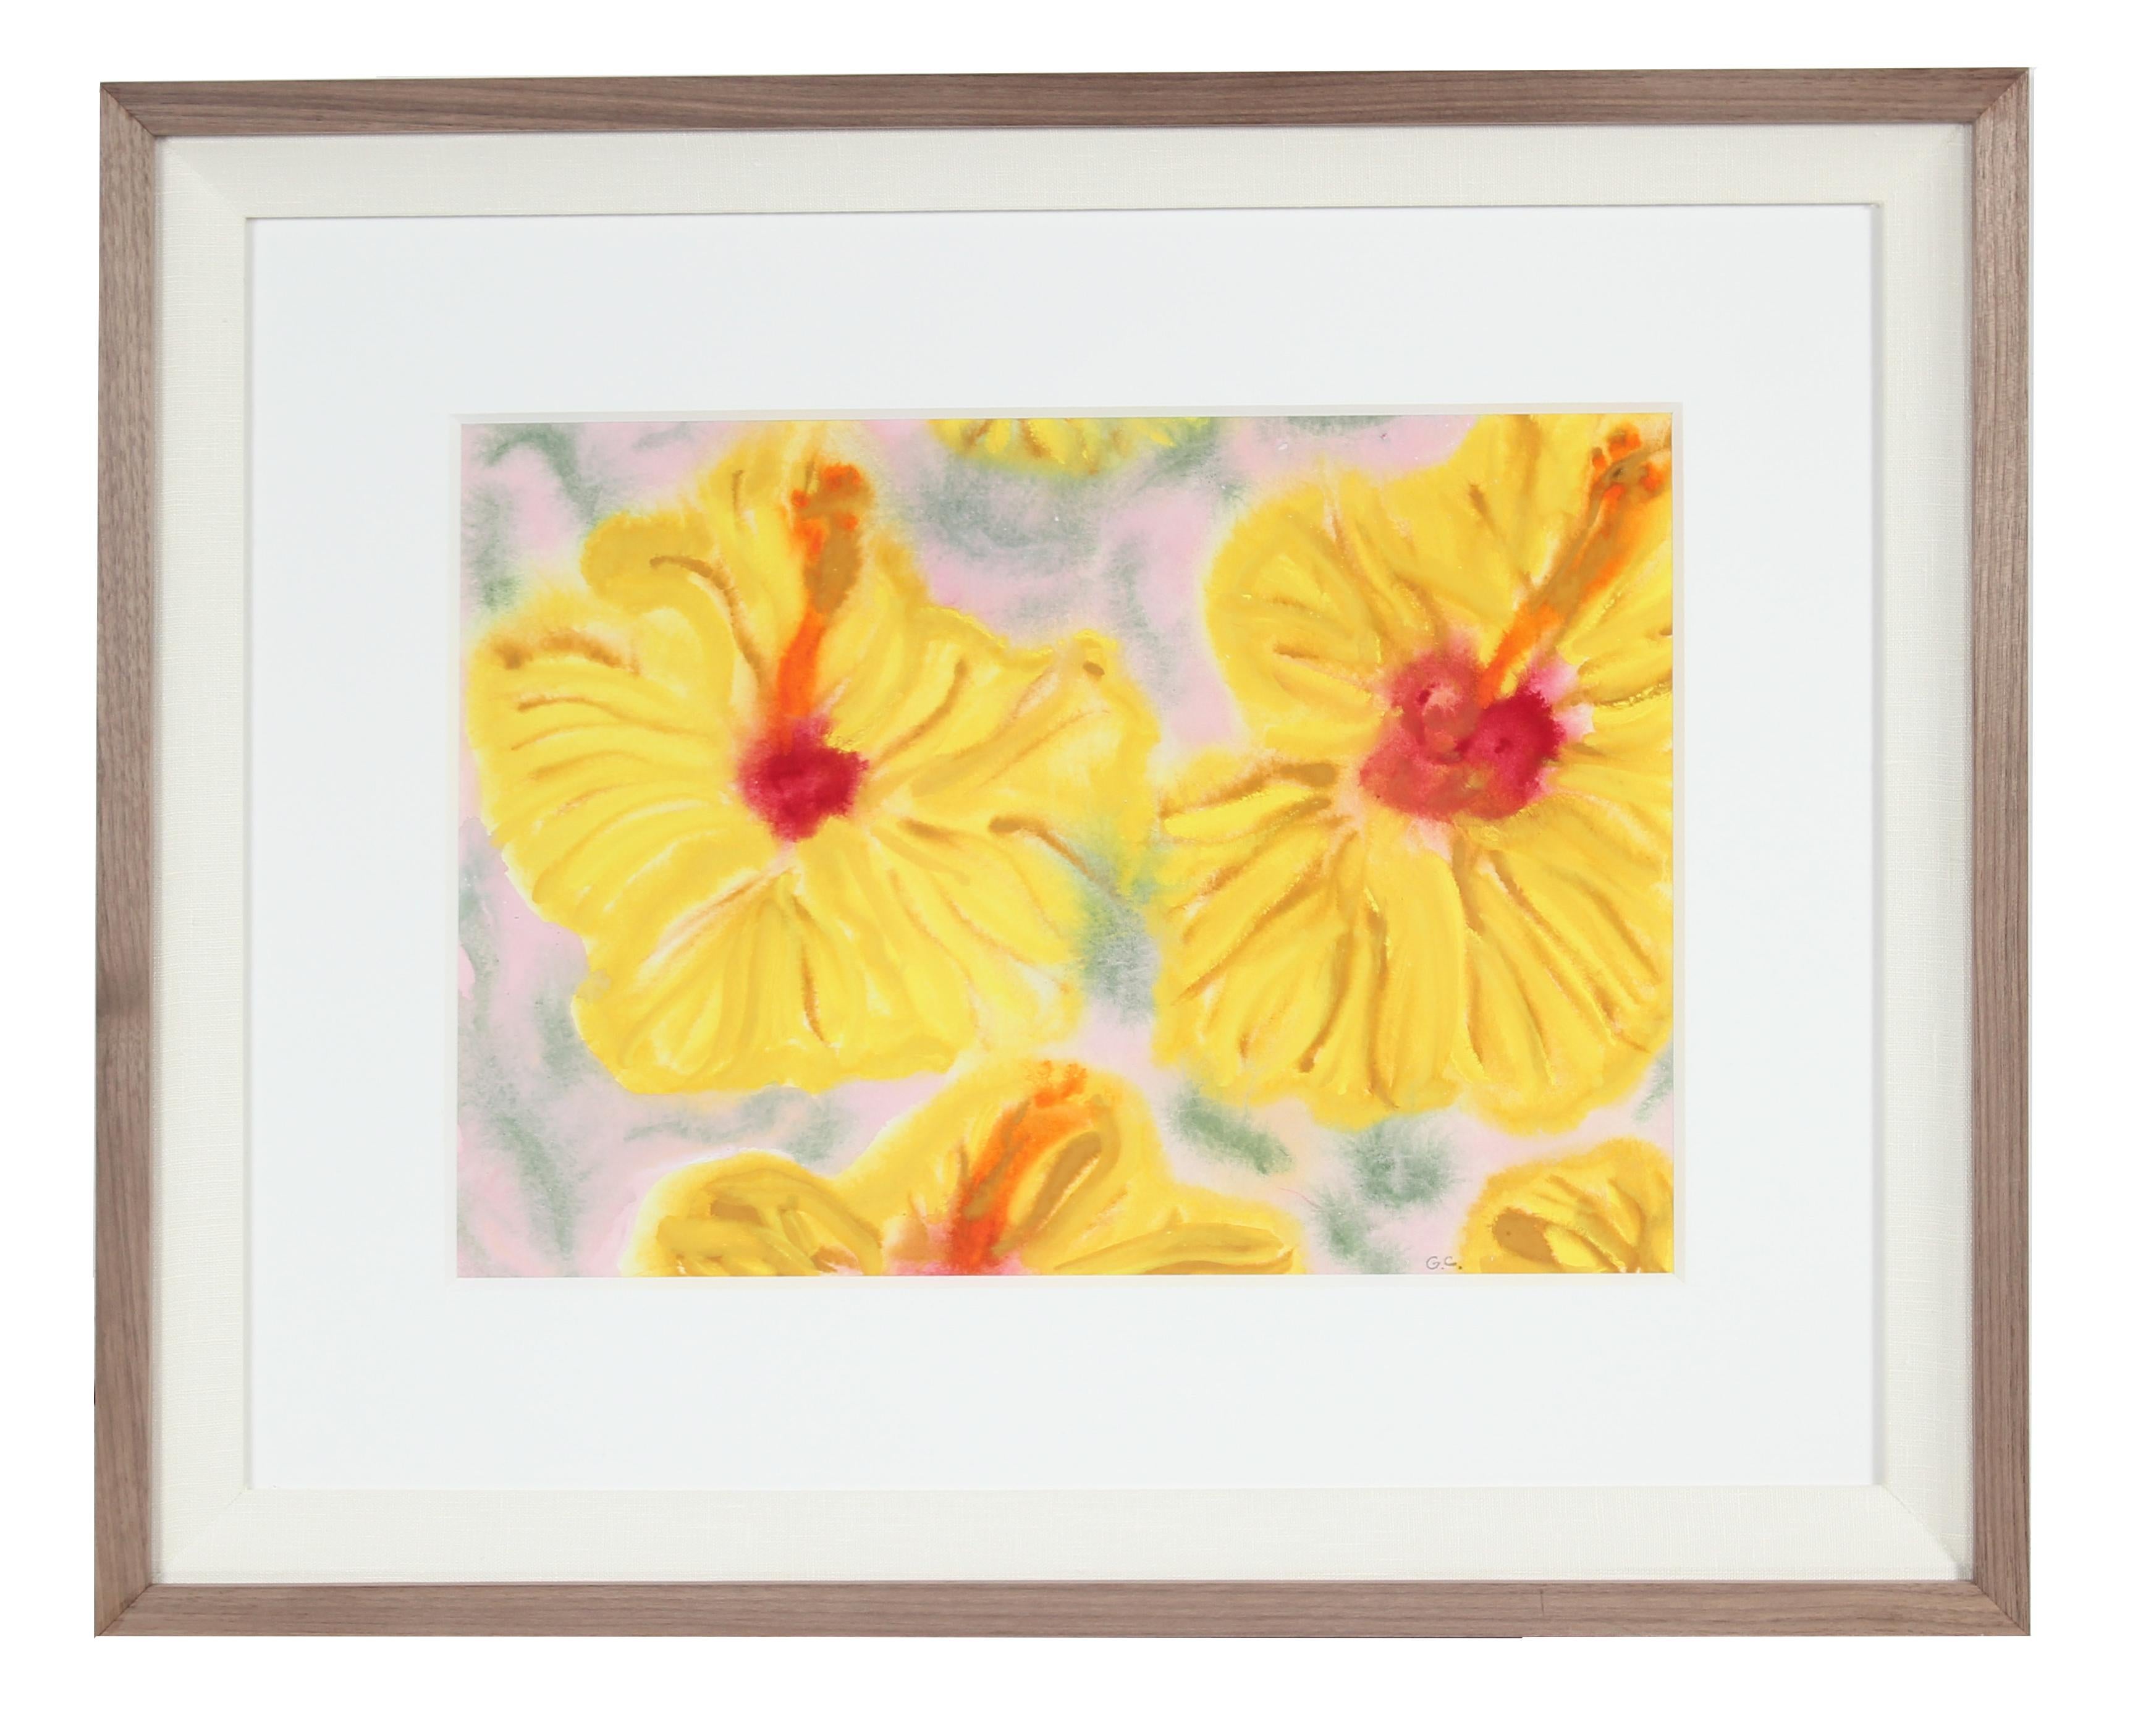 "Yellow Hibiscus", Hawaii Still Life, Ink, Watercolor and Gouache on Paper